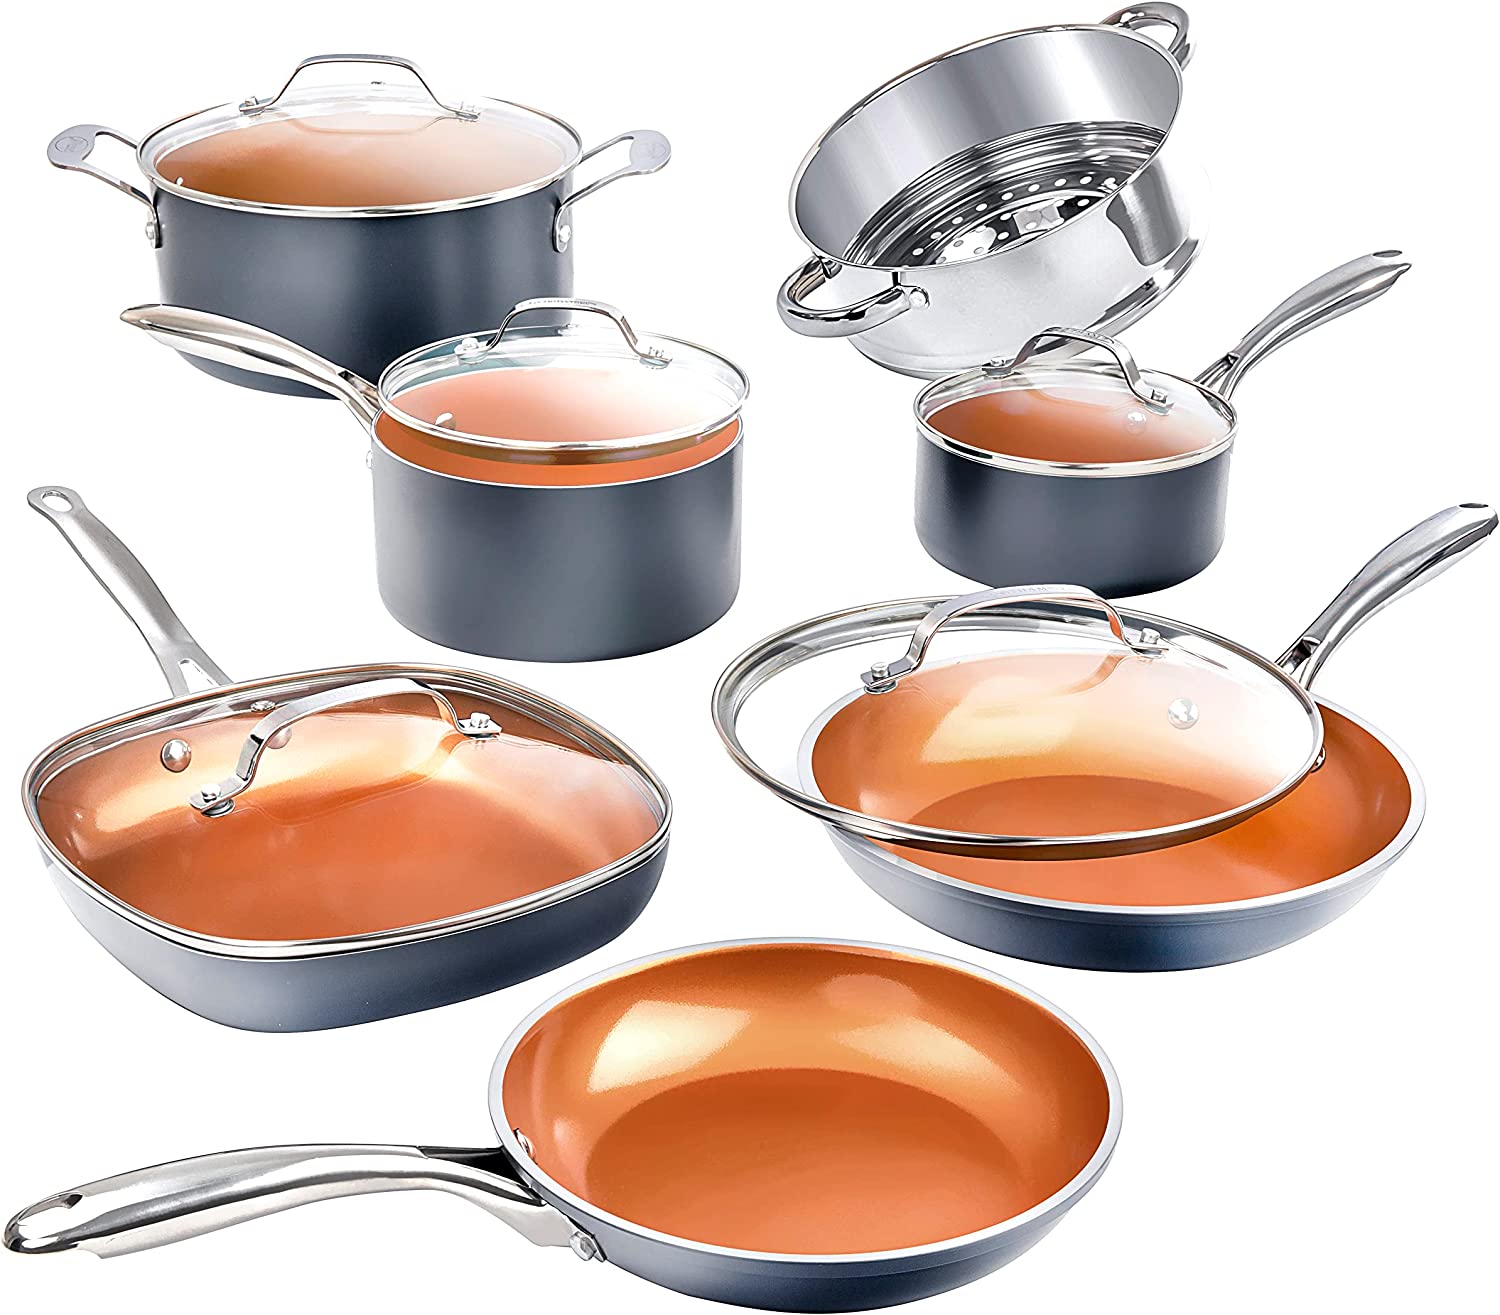 https://bigbigmart.com/wp-content/uploads/2023/06/Gotham-Steel-Pots-and-Pans-Set-12-Piece-Cookware-Set-with-Ultra-Nonstick-Ceramic-Coating-by-Chef-Daniel-Green-100-PFOA-Free-Stay-Cool-Handles-Metal-Utensil-Dishwasher-Safe-2023-Edition.jpg